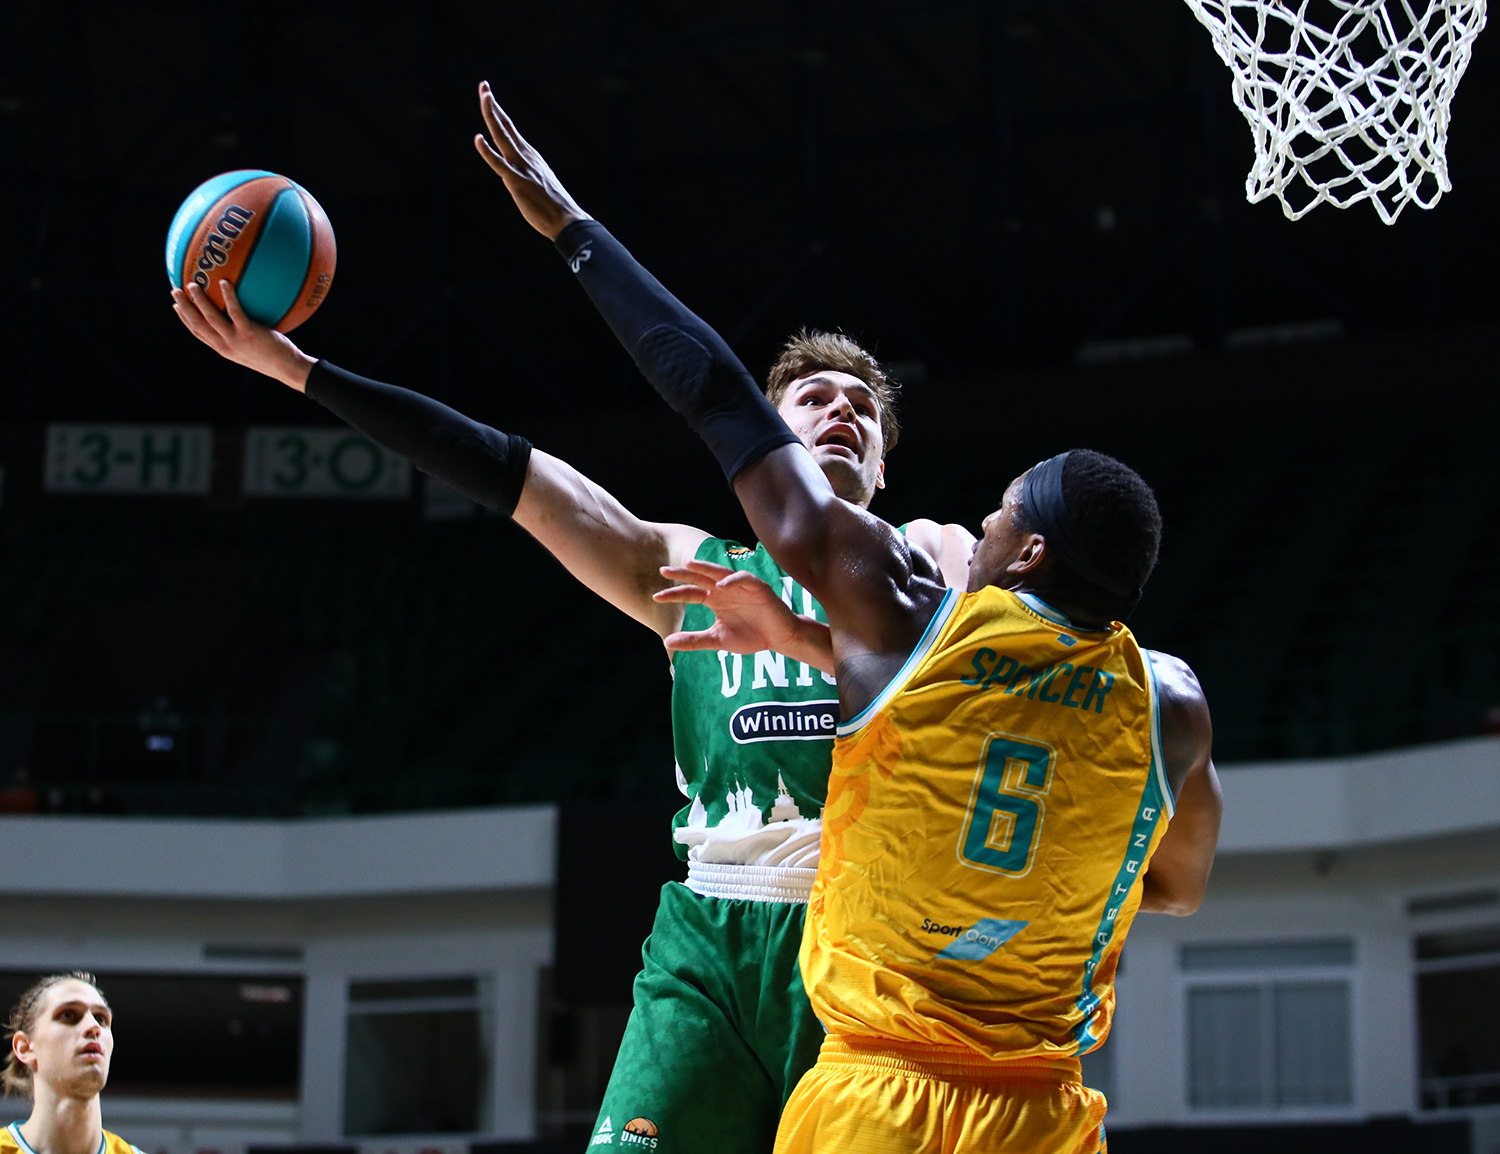 UNICS strengthened in the 1st place in the game against Astana